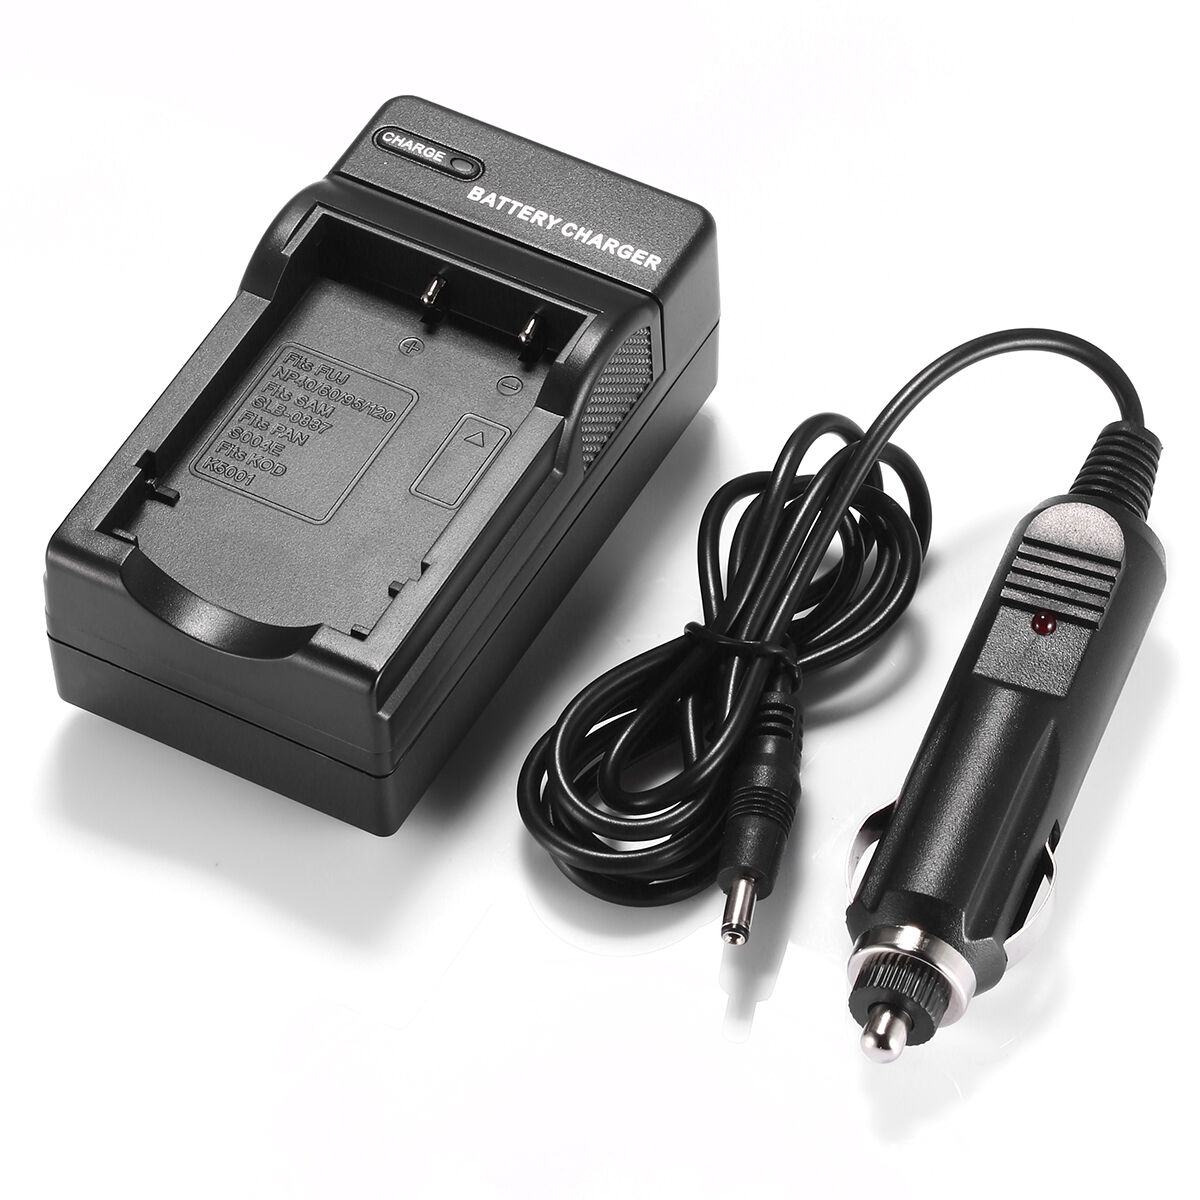 CASIO Exilim ZOOM EX-Z2300 battery charger